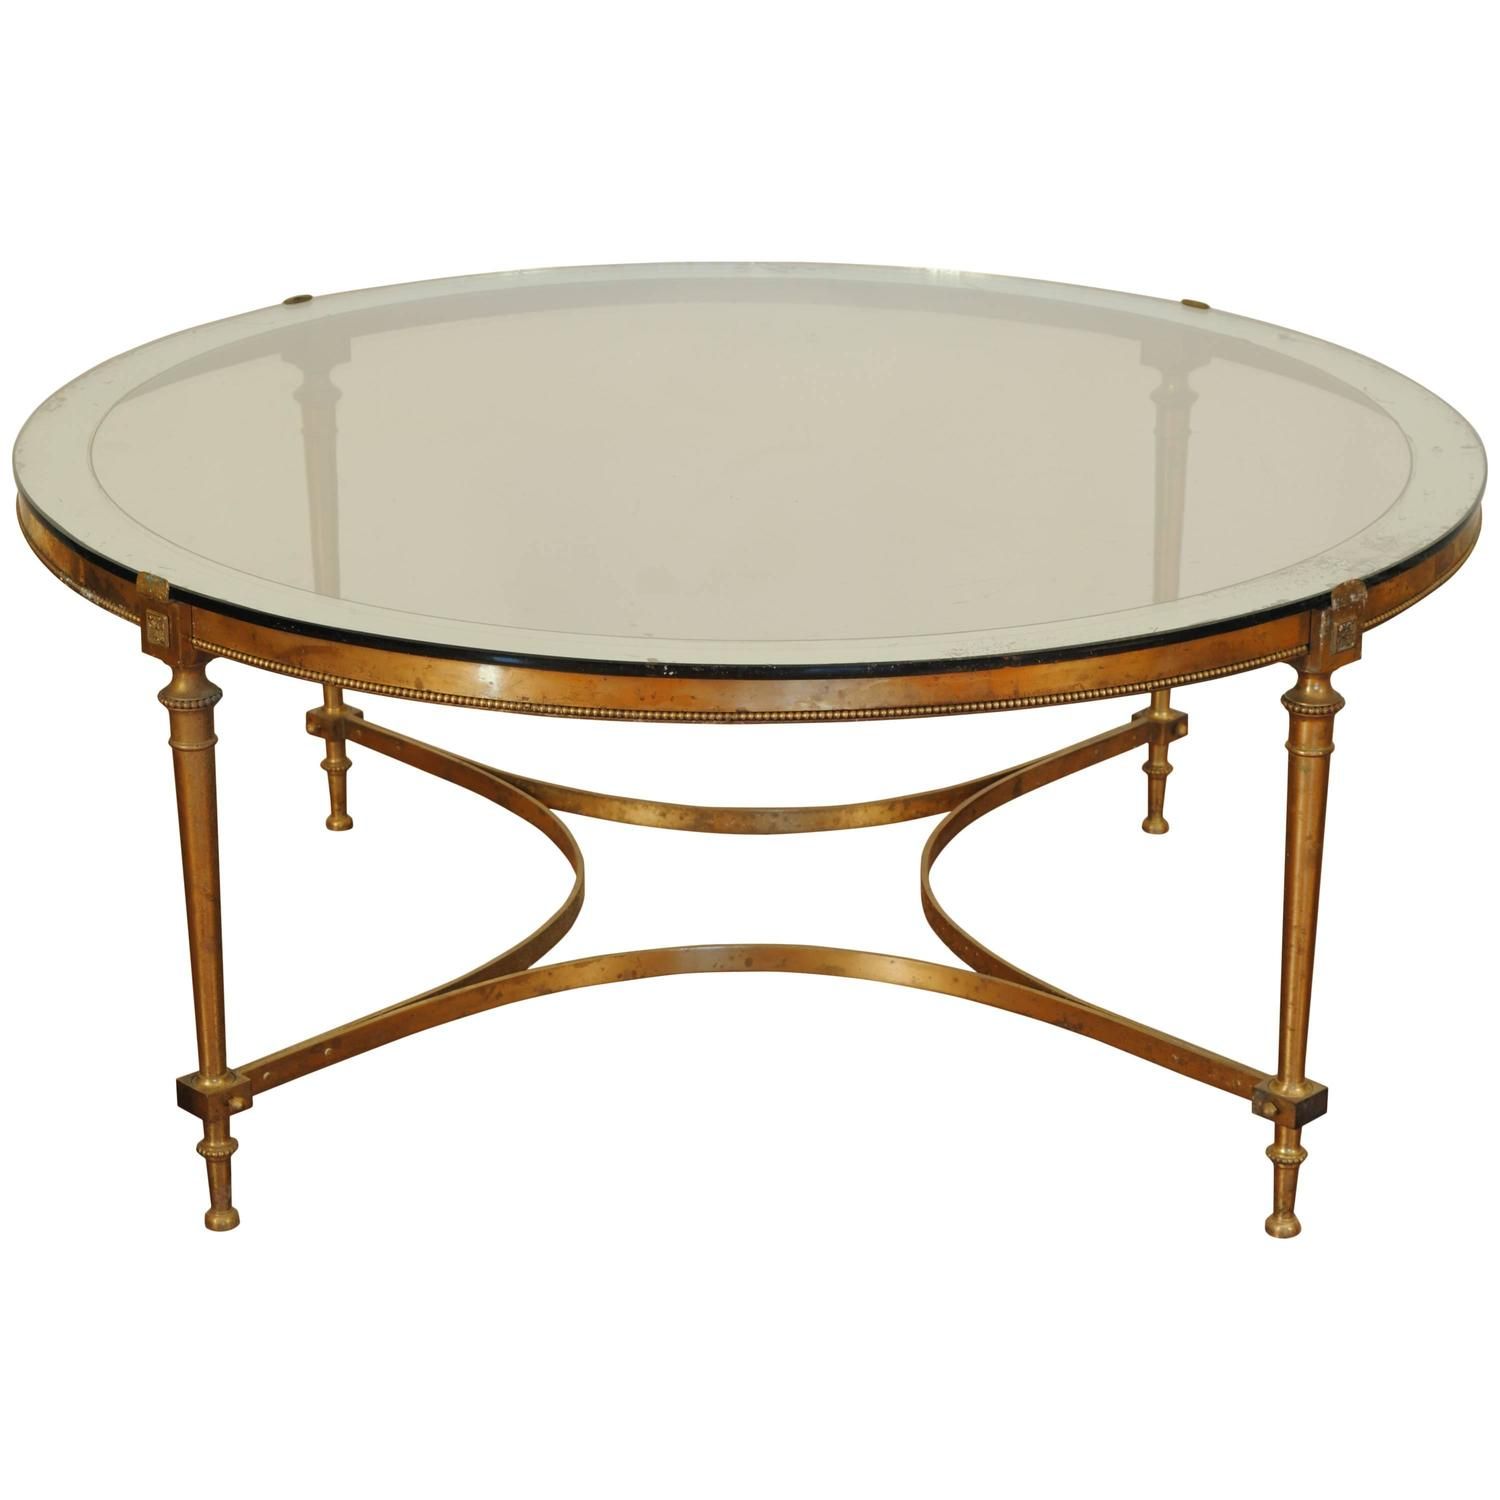 Round Brass Coffee Table Nz – Chic Natural Hide And Brass Base Round Throughout Glass Top Coffee Tables (View 8 of 15)